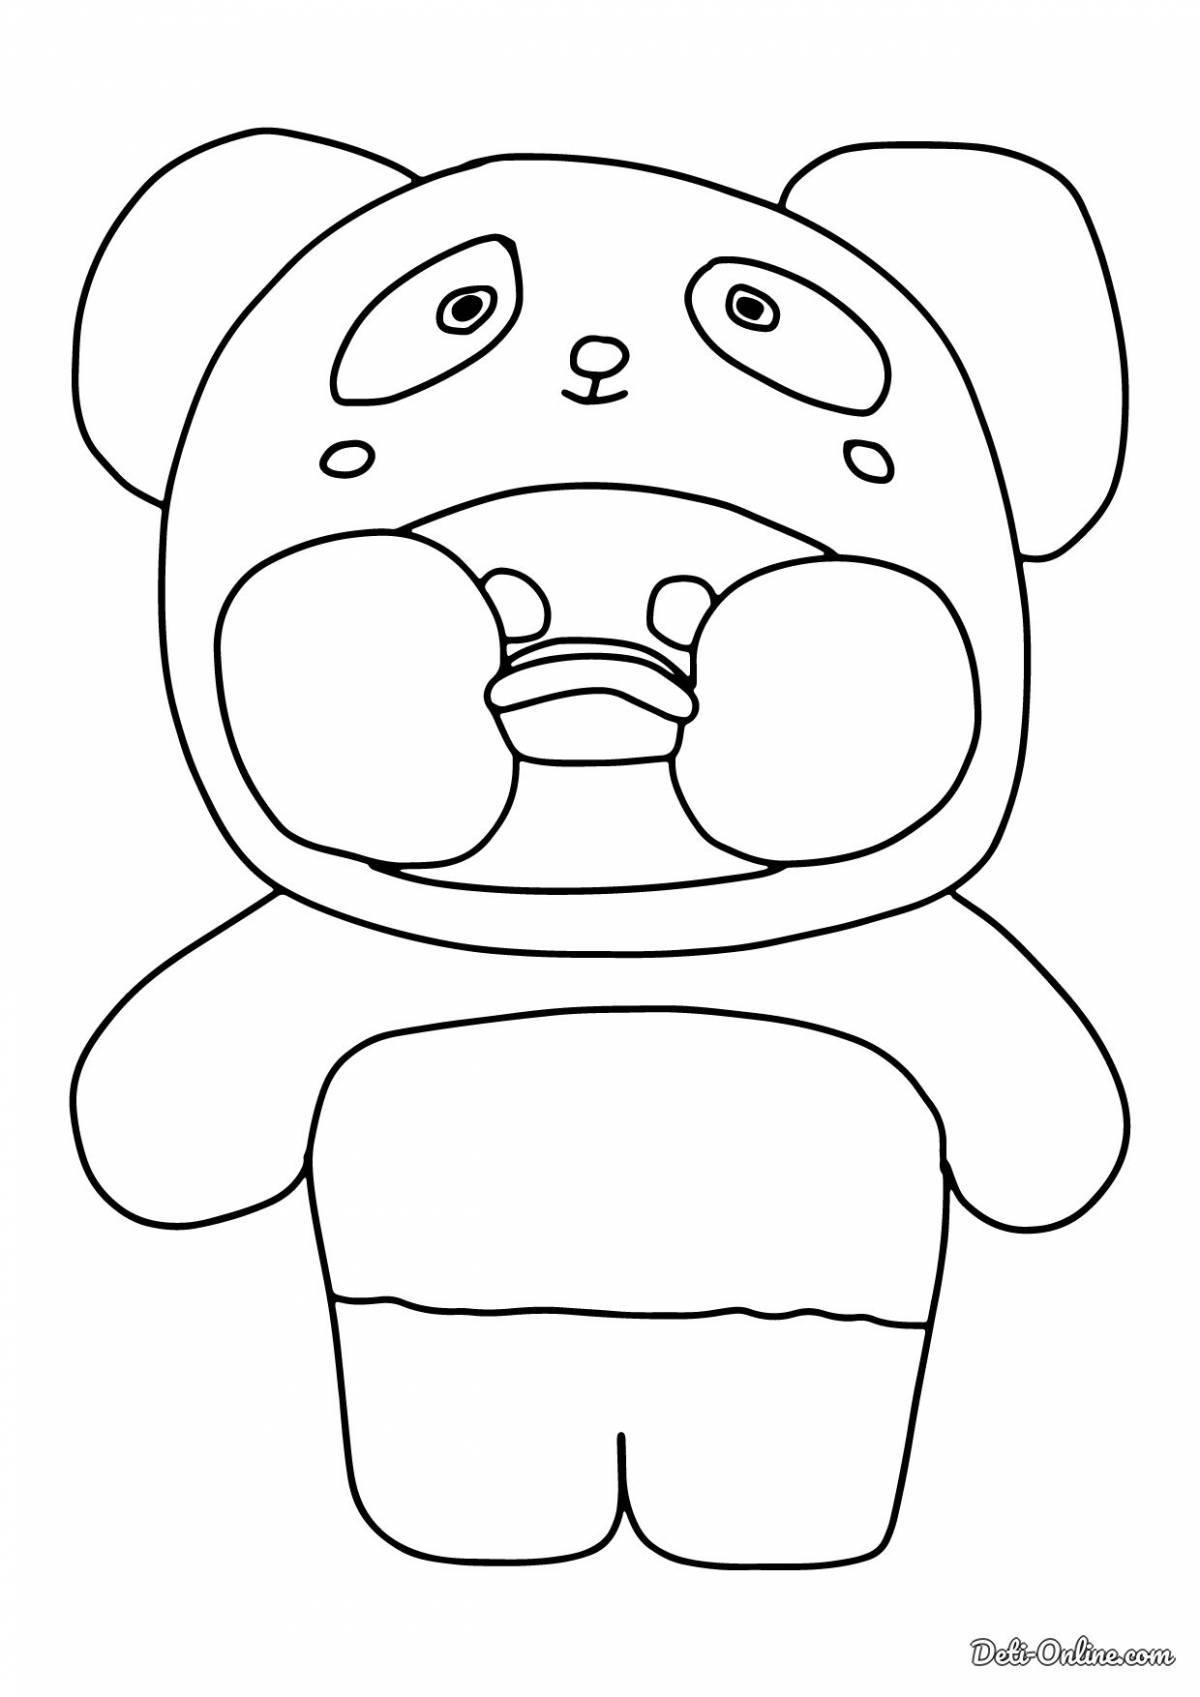 Lalafan Duck Coloring Page for Toddlers